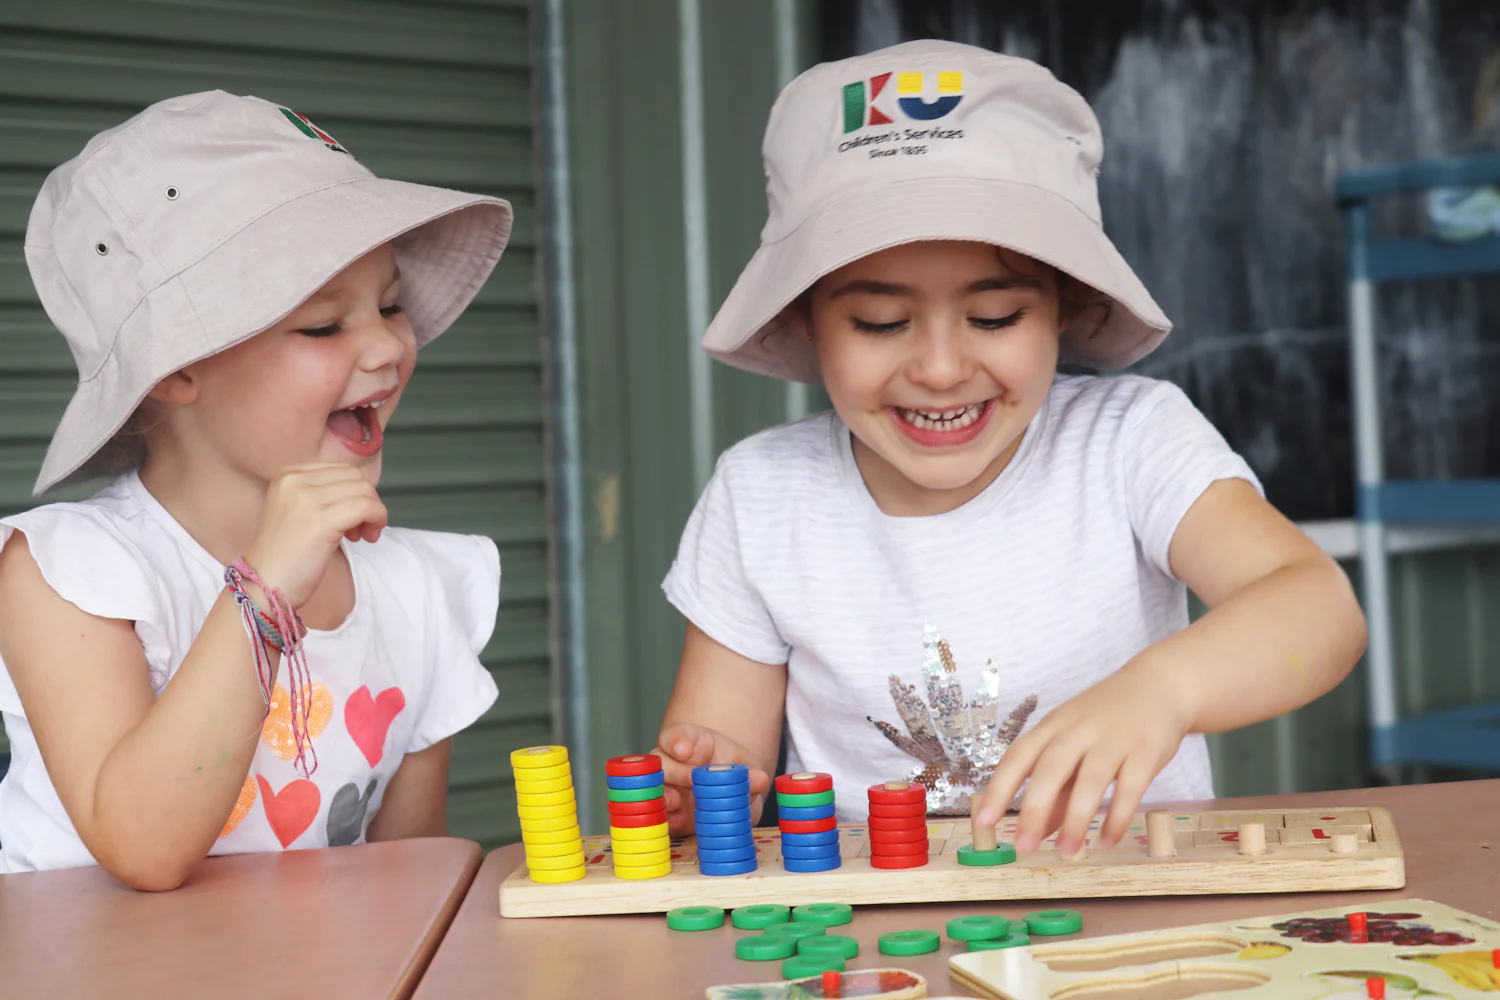 Child care and Preschool Figtree